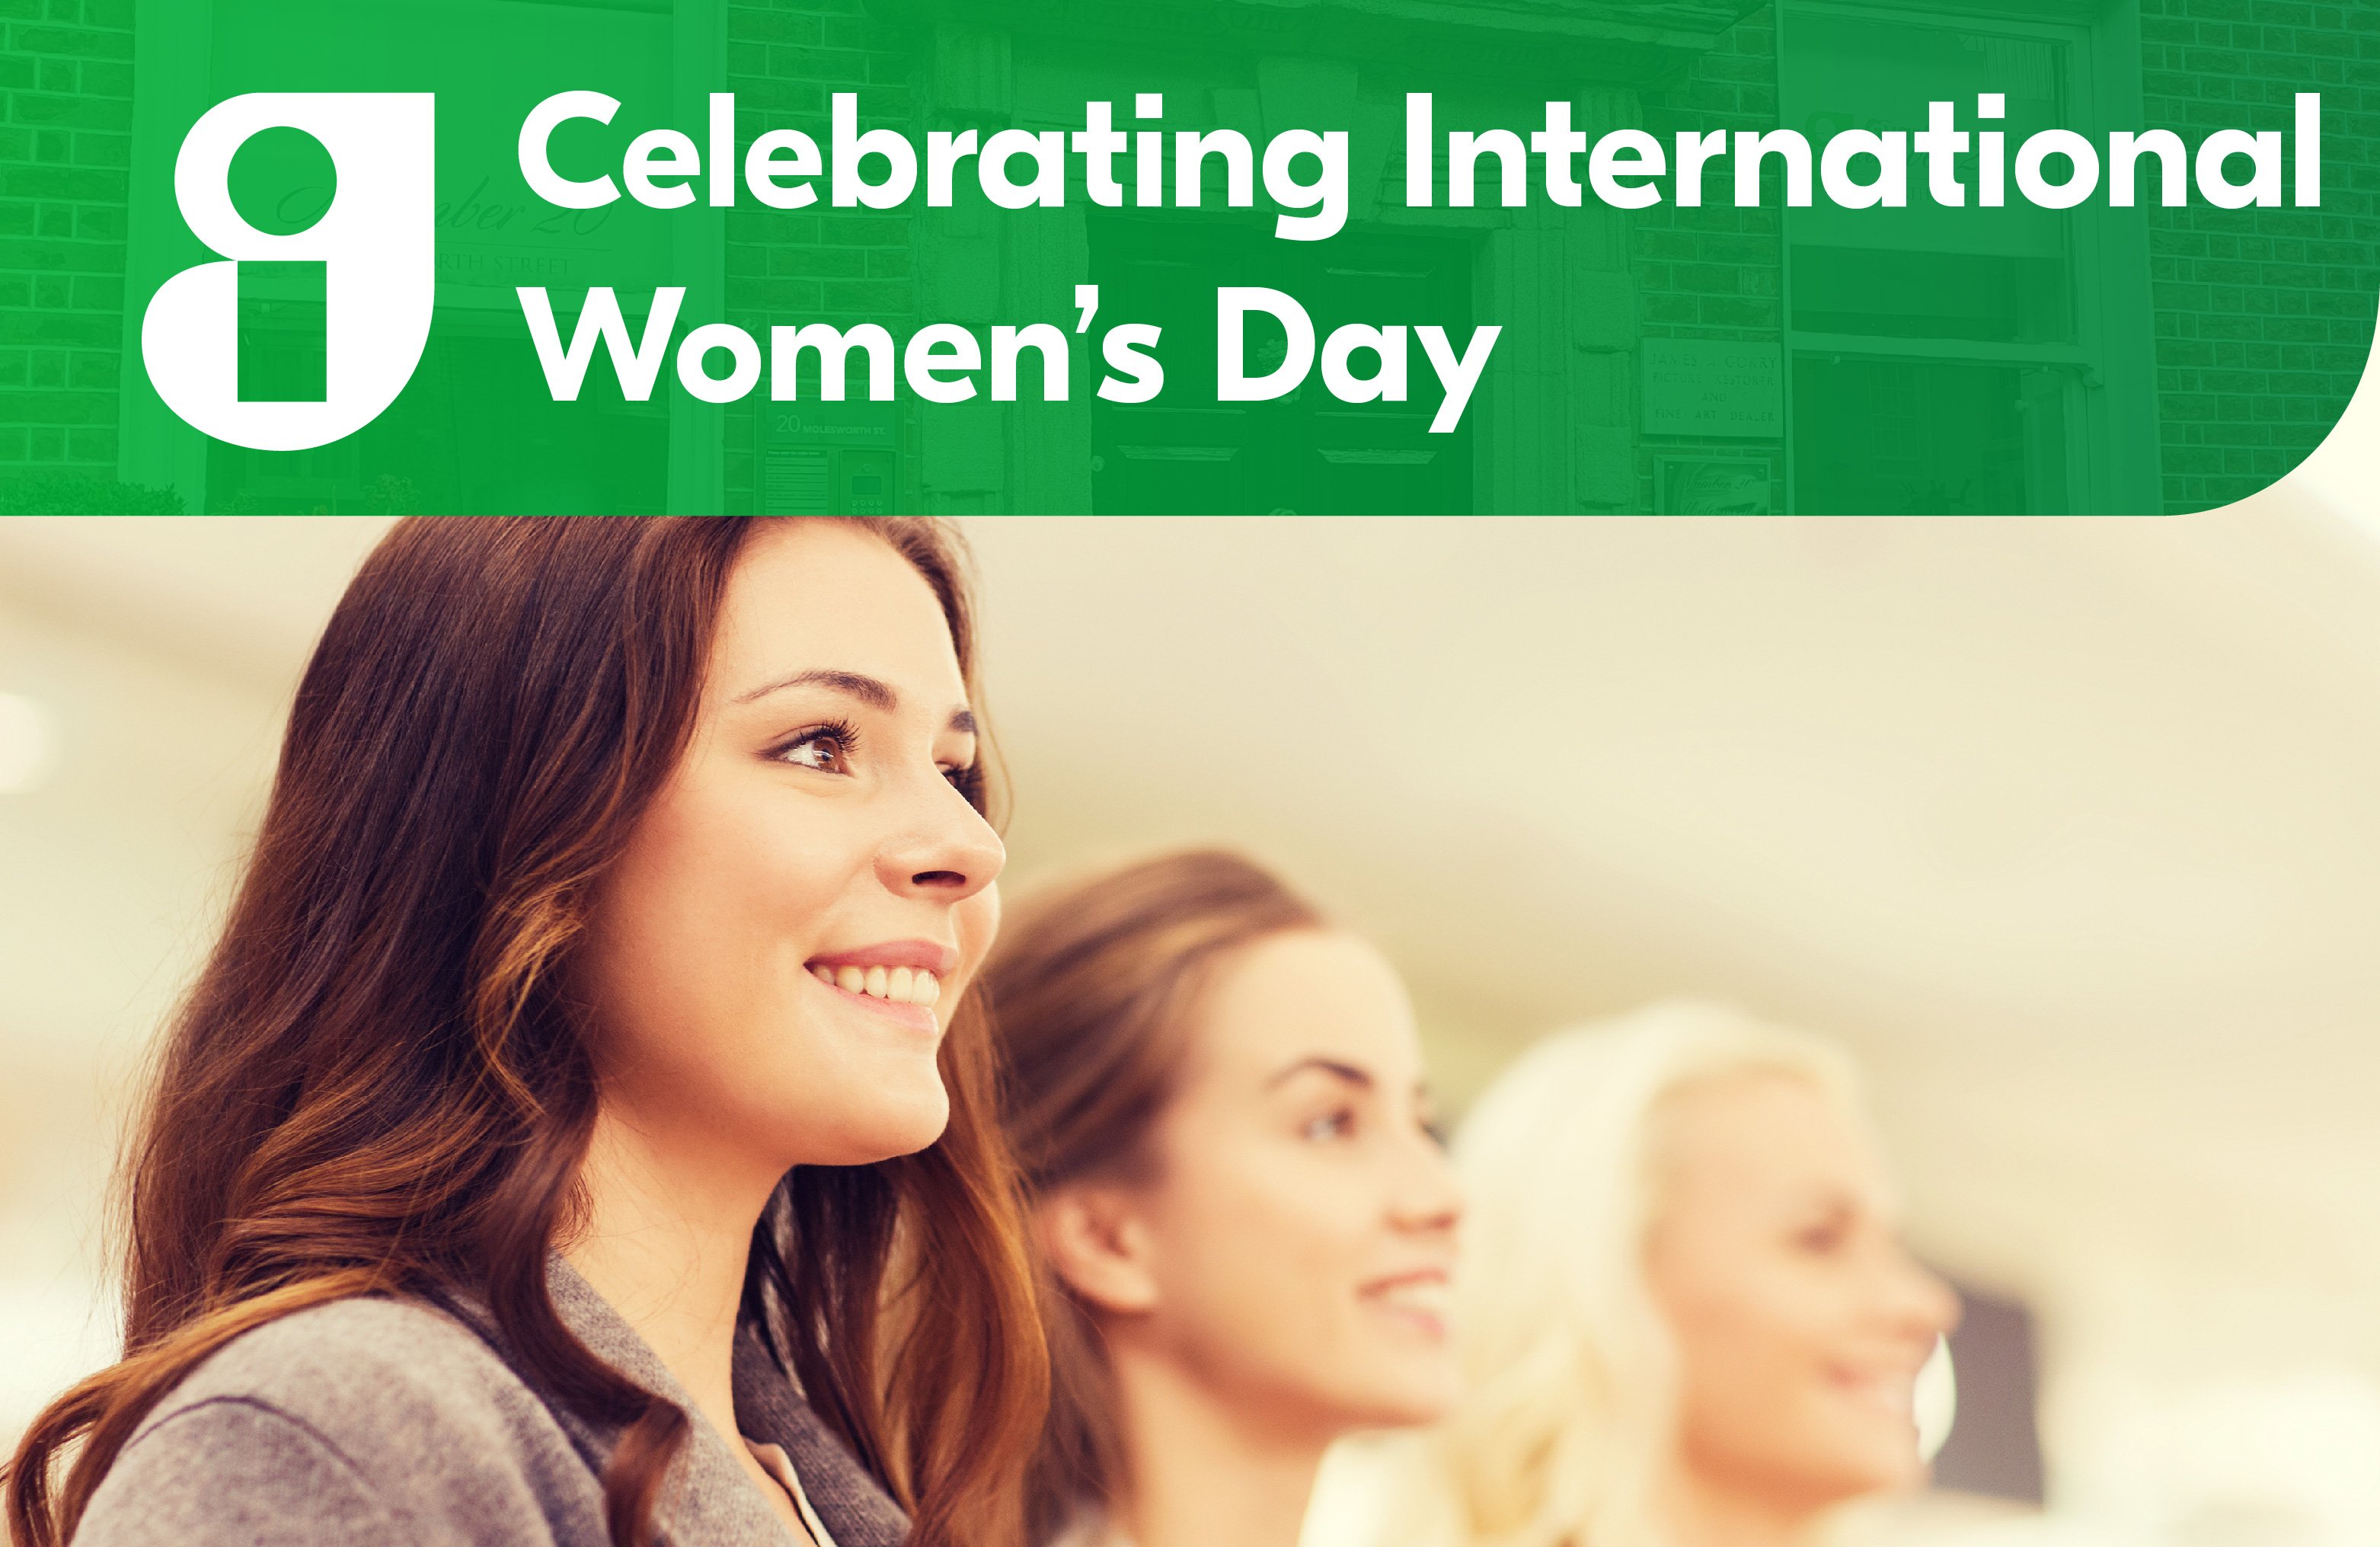 Guaranteed Irish International Women's Day Event at the Iveagh Gardens.